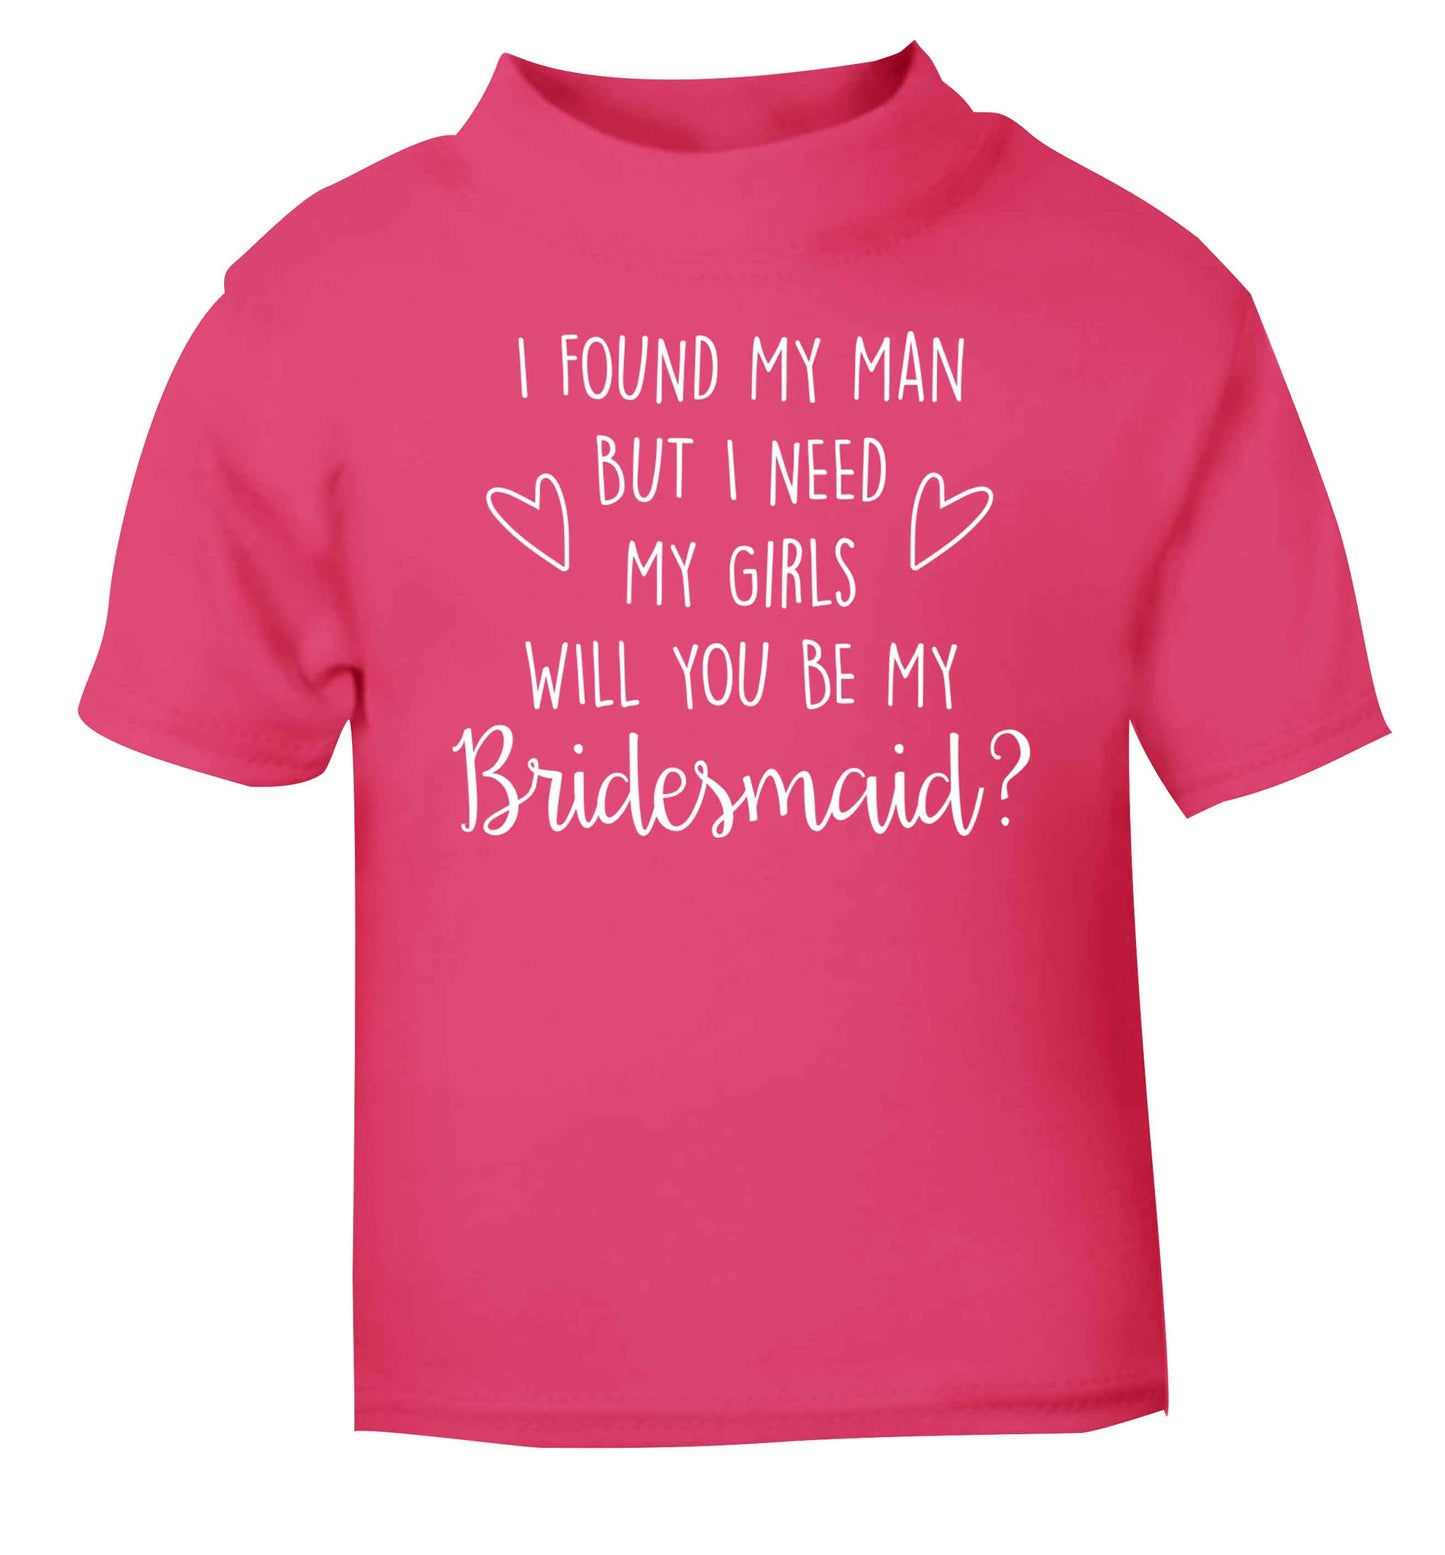 I found my man but I need my girls will you be my bridesmaid? pink baby toddler Tshirt 2 Years